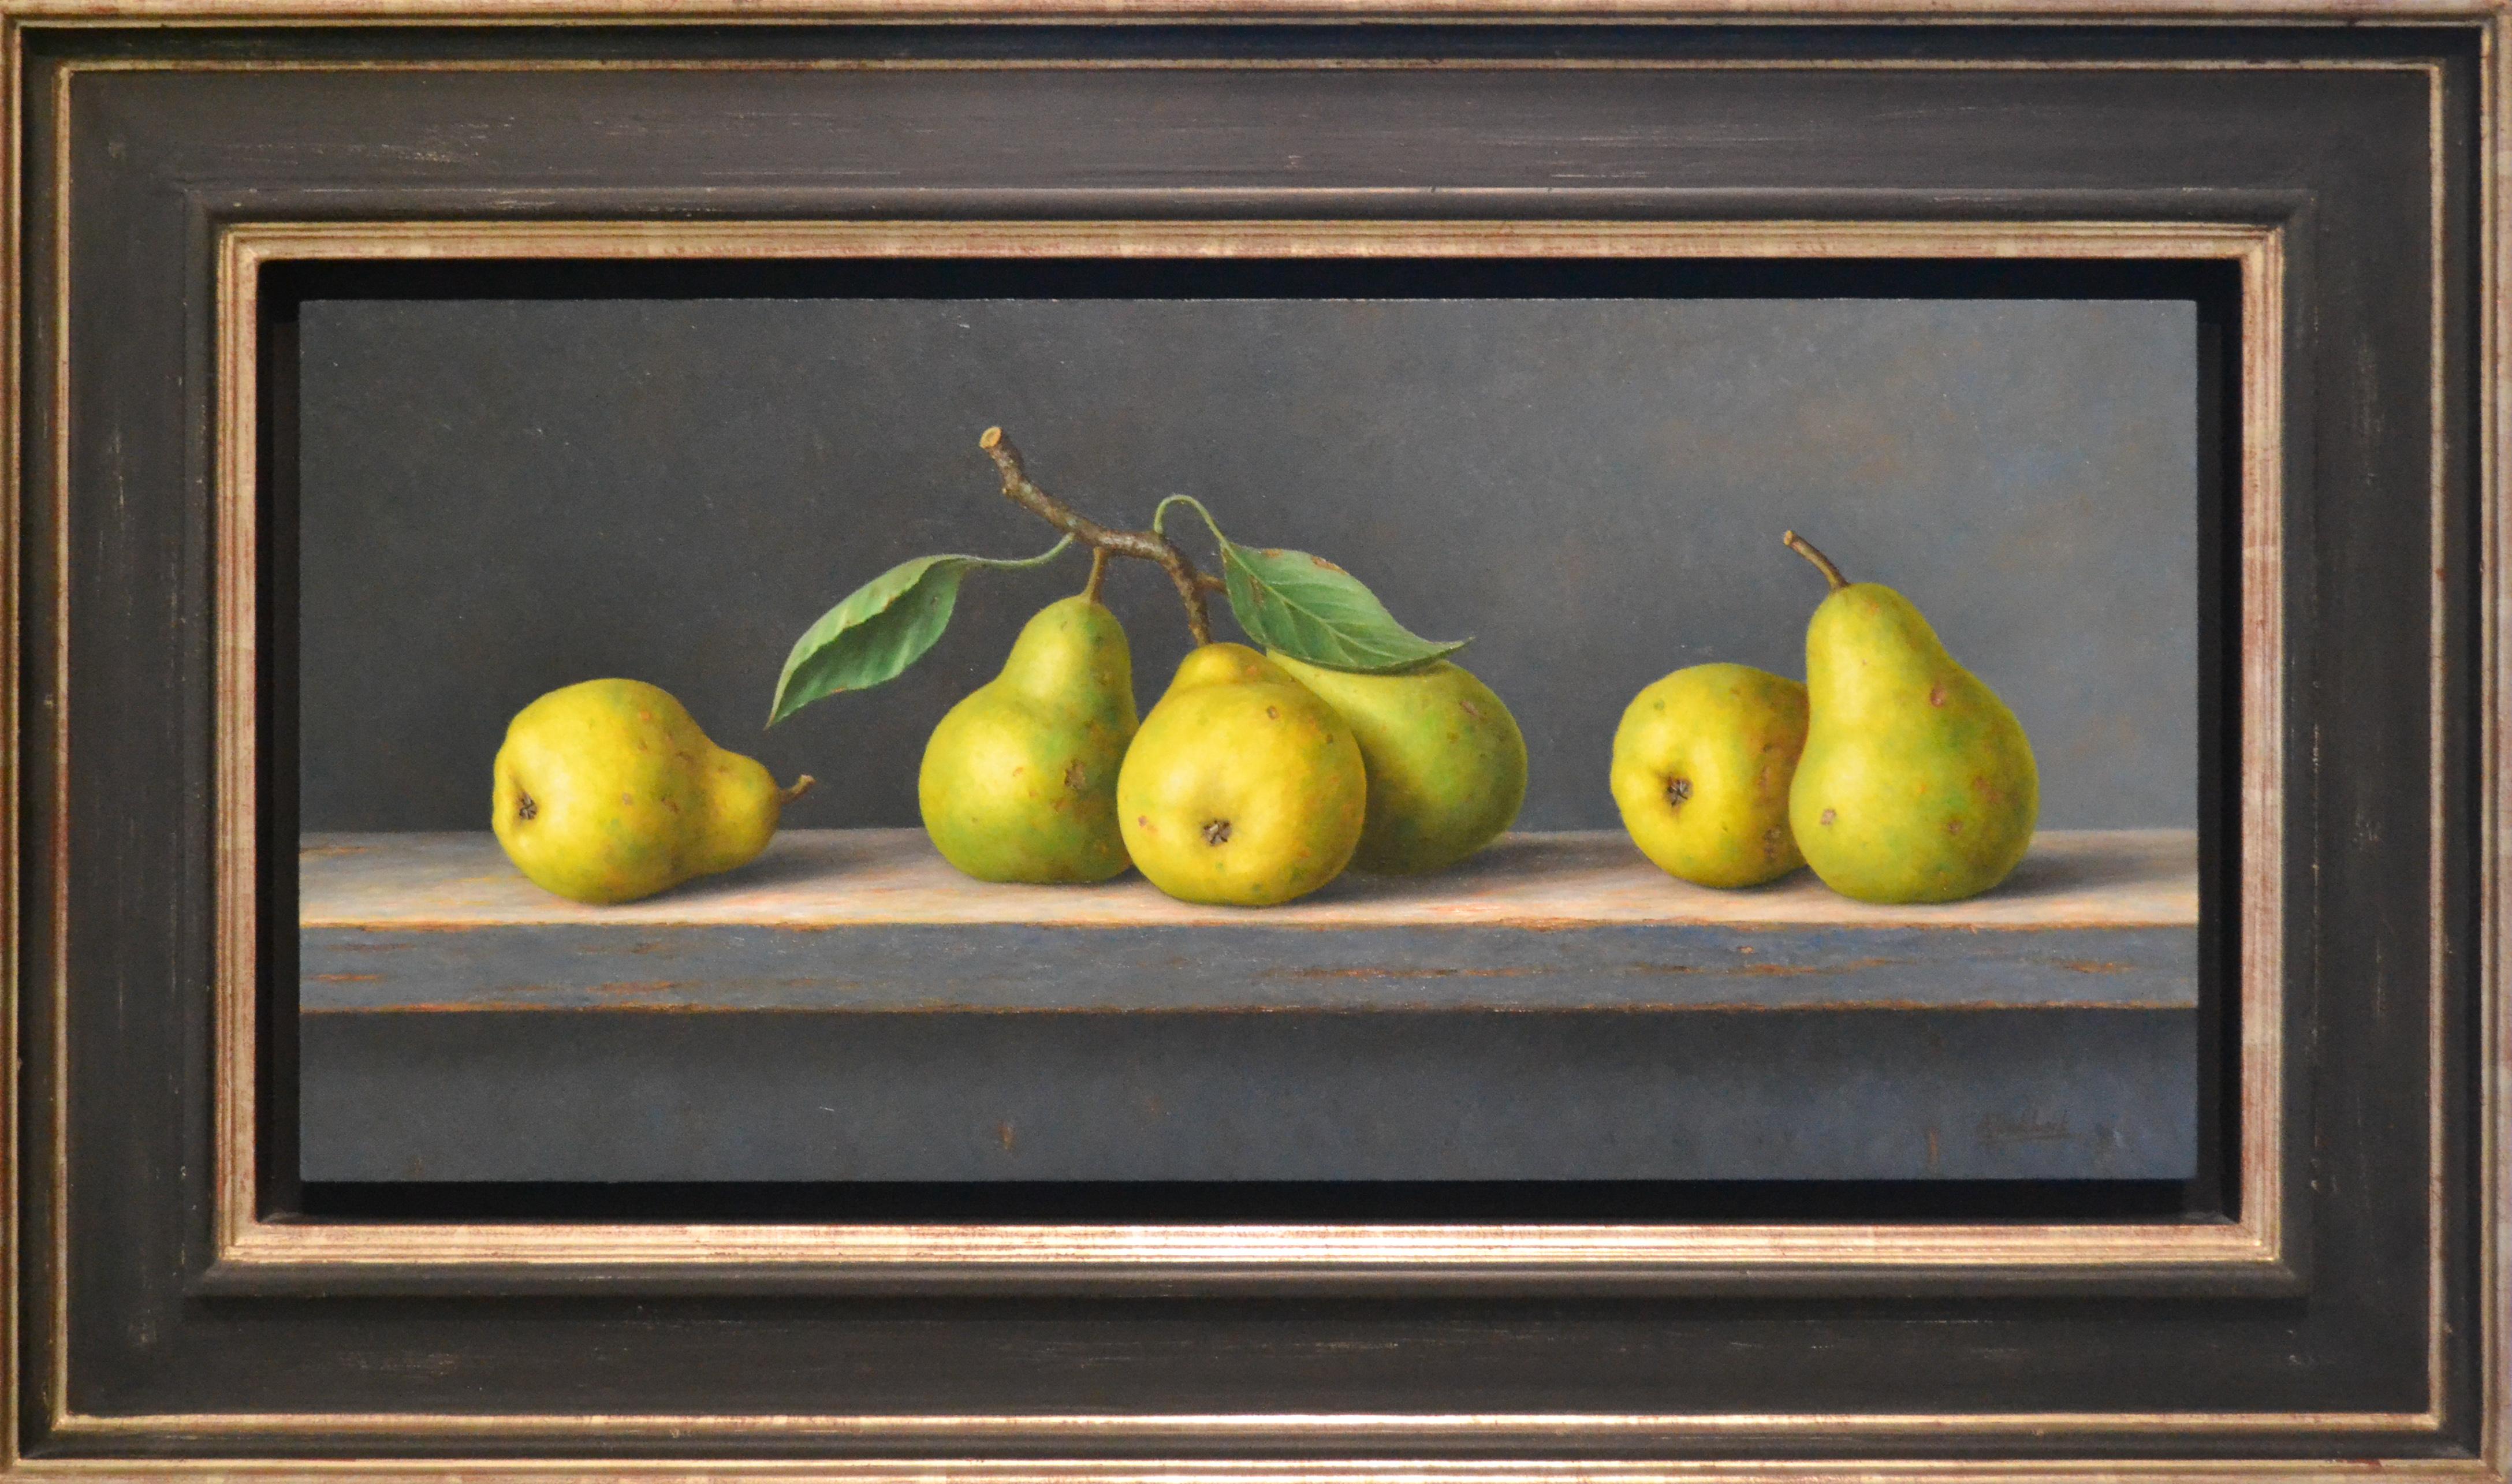 Pears - Annelies Jonkhart, 21st Century Contemporary Oil Painting with fruit 1